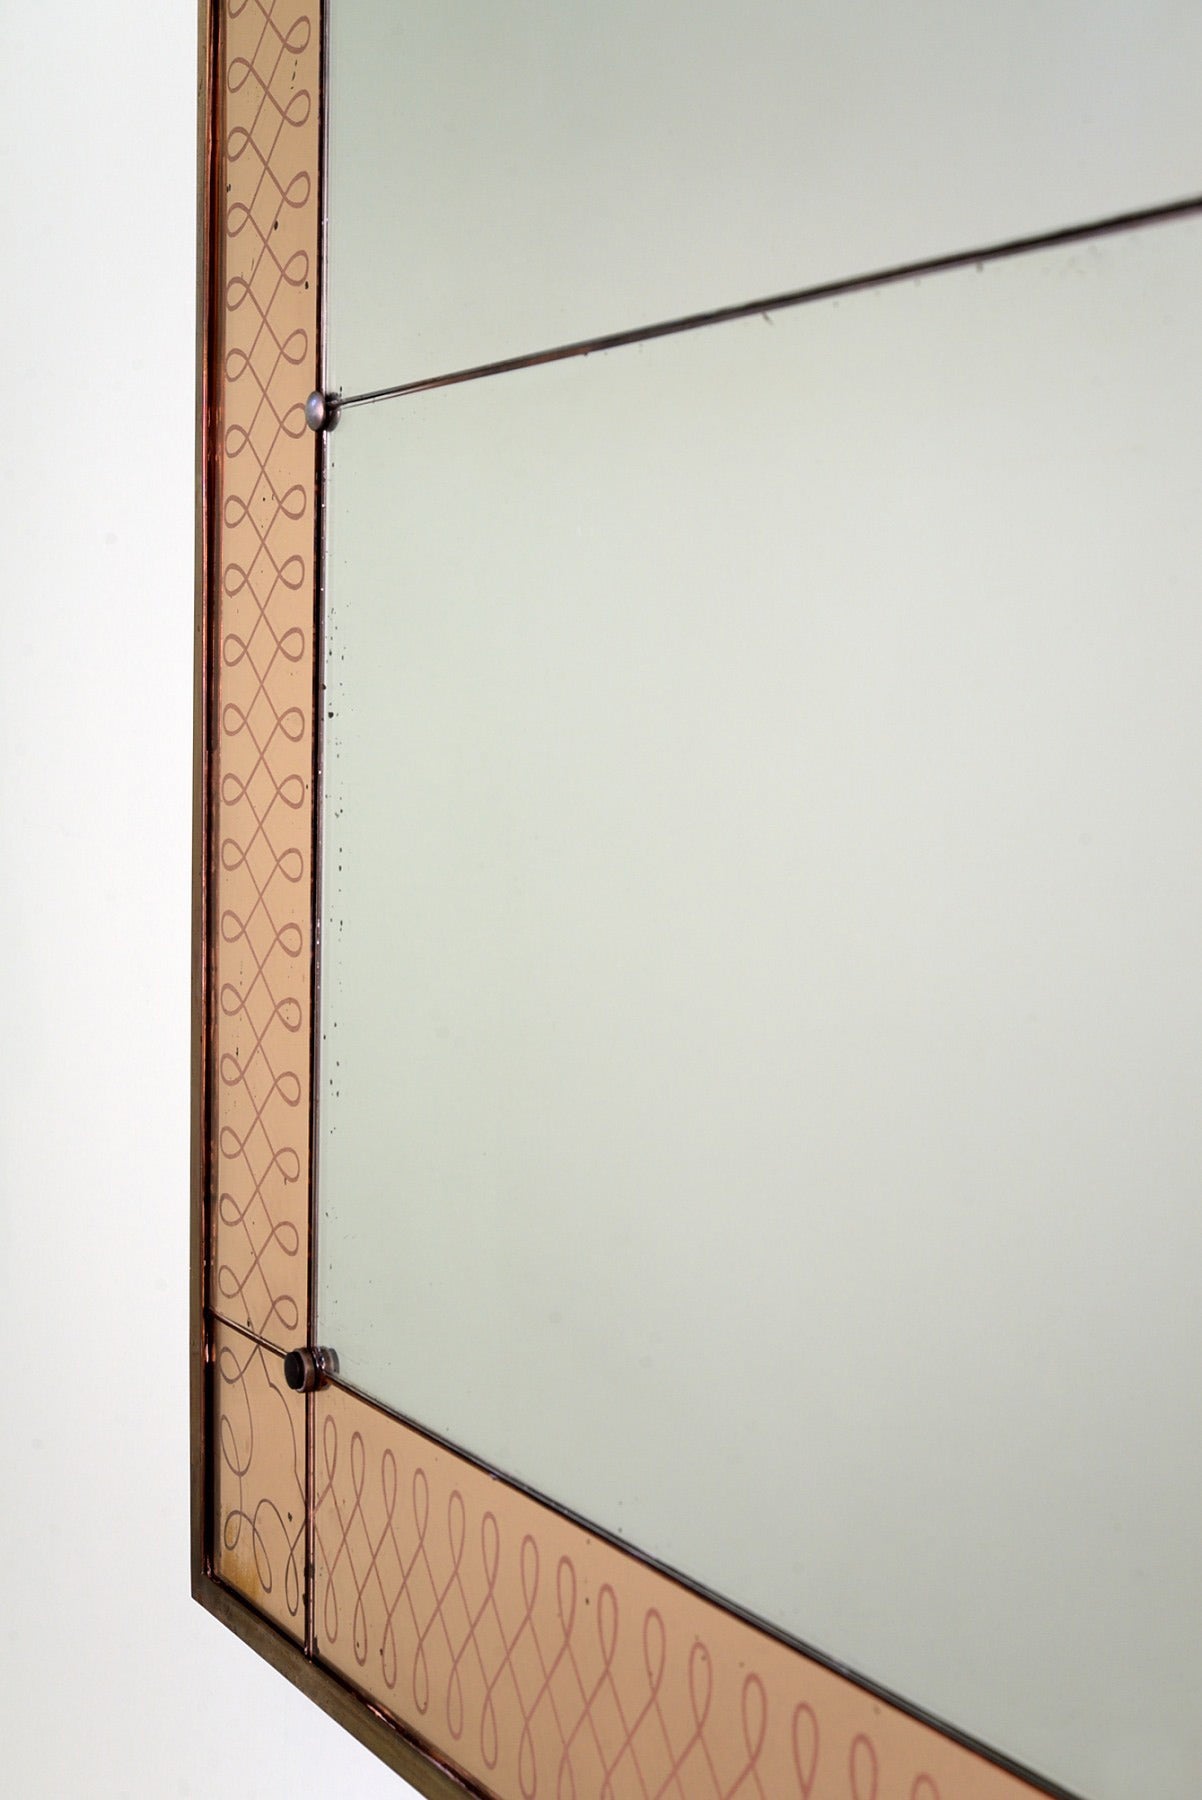 Extraordinary mirror by Osvaldo Borsani created in 1950 for the private commission of Casa C. in Rome. Etched glass and decorated frame.